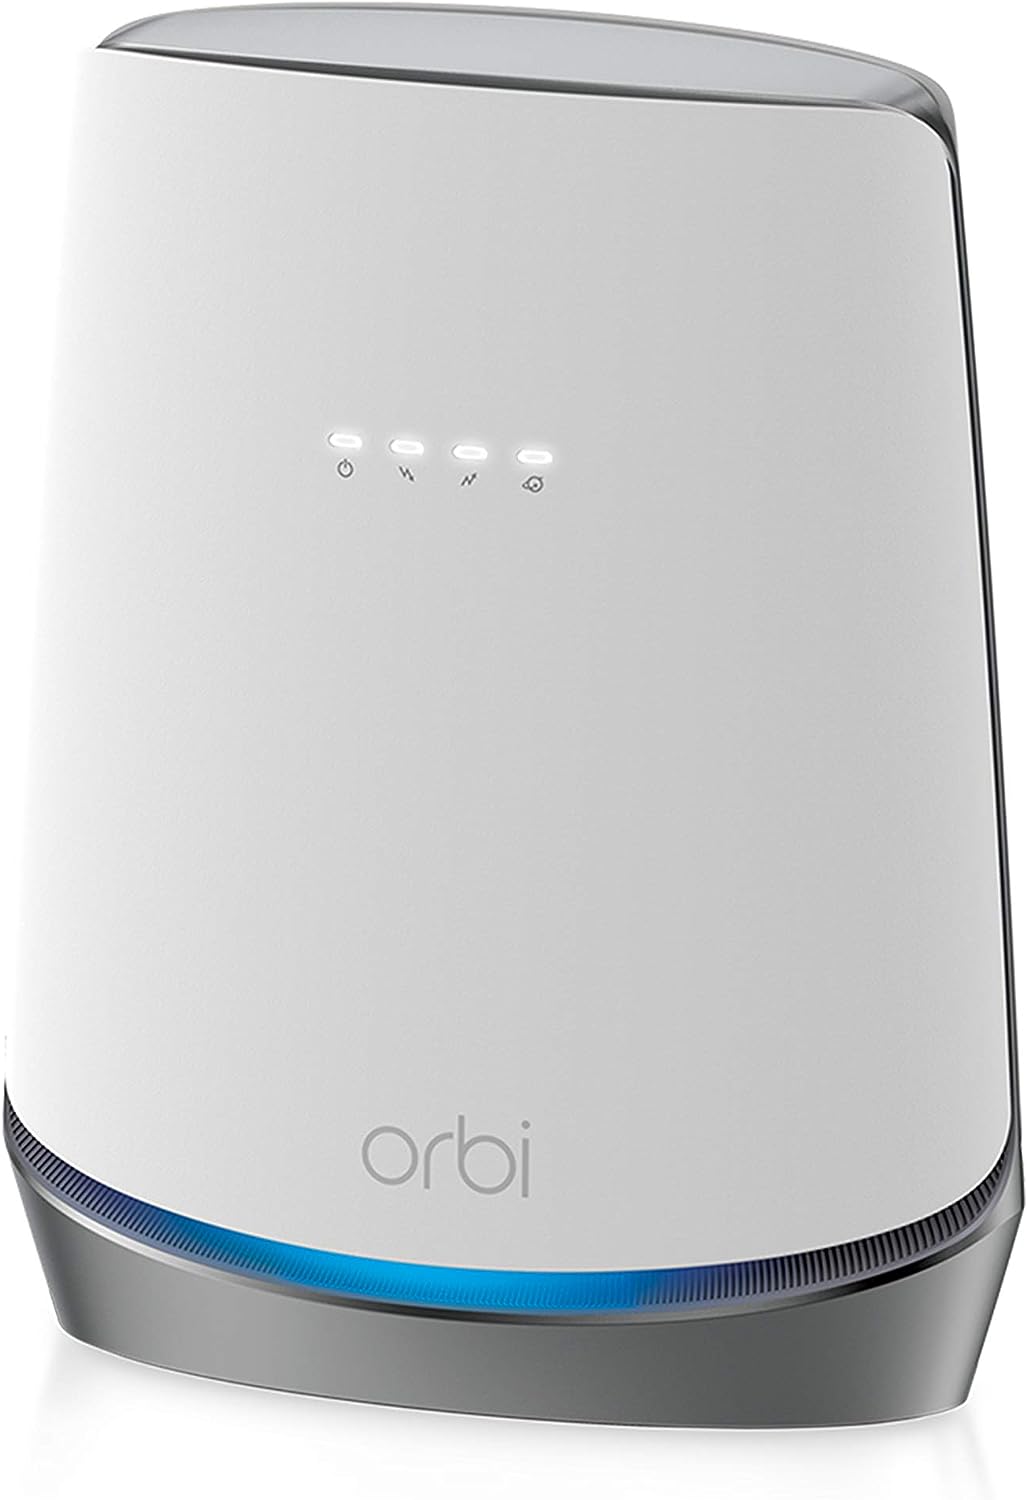 NETGEAR Orbi WiFi 6 Router with DOCSIS 3.1 Built-in Cable Modem - $335